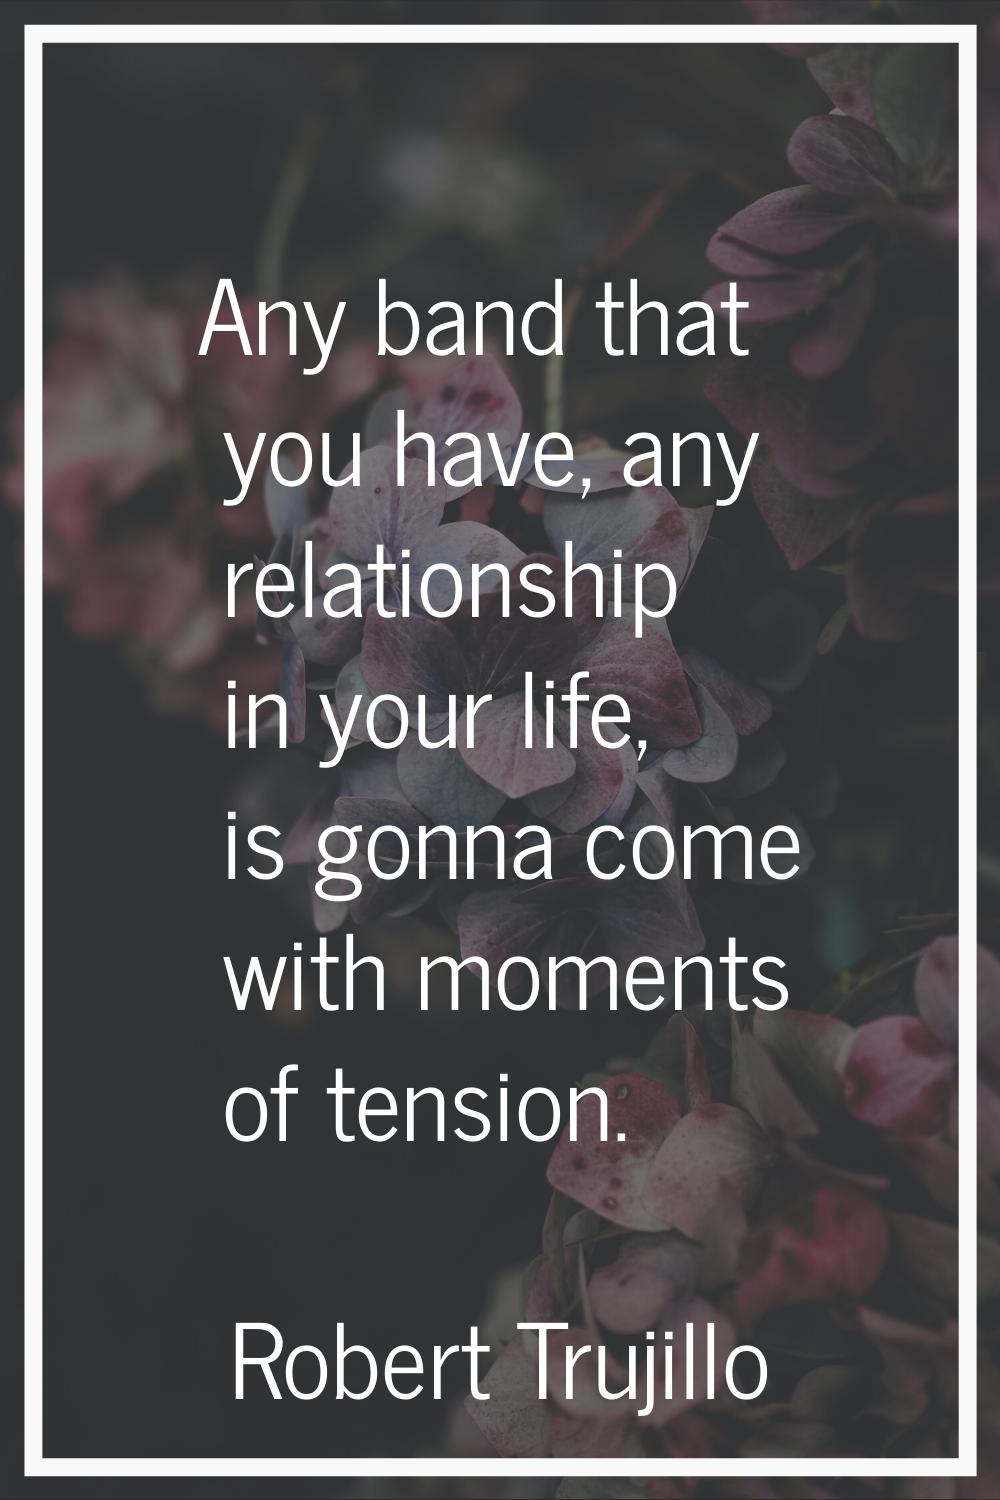 Any band that you have, any relationship in your life, is gonna come with moments of tension.